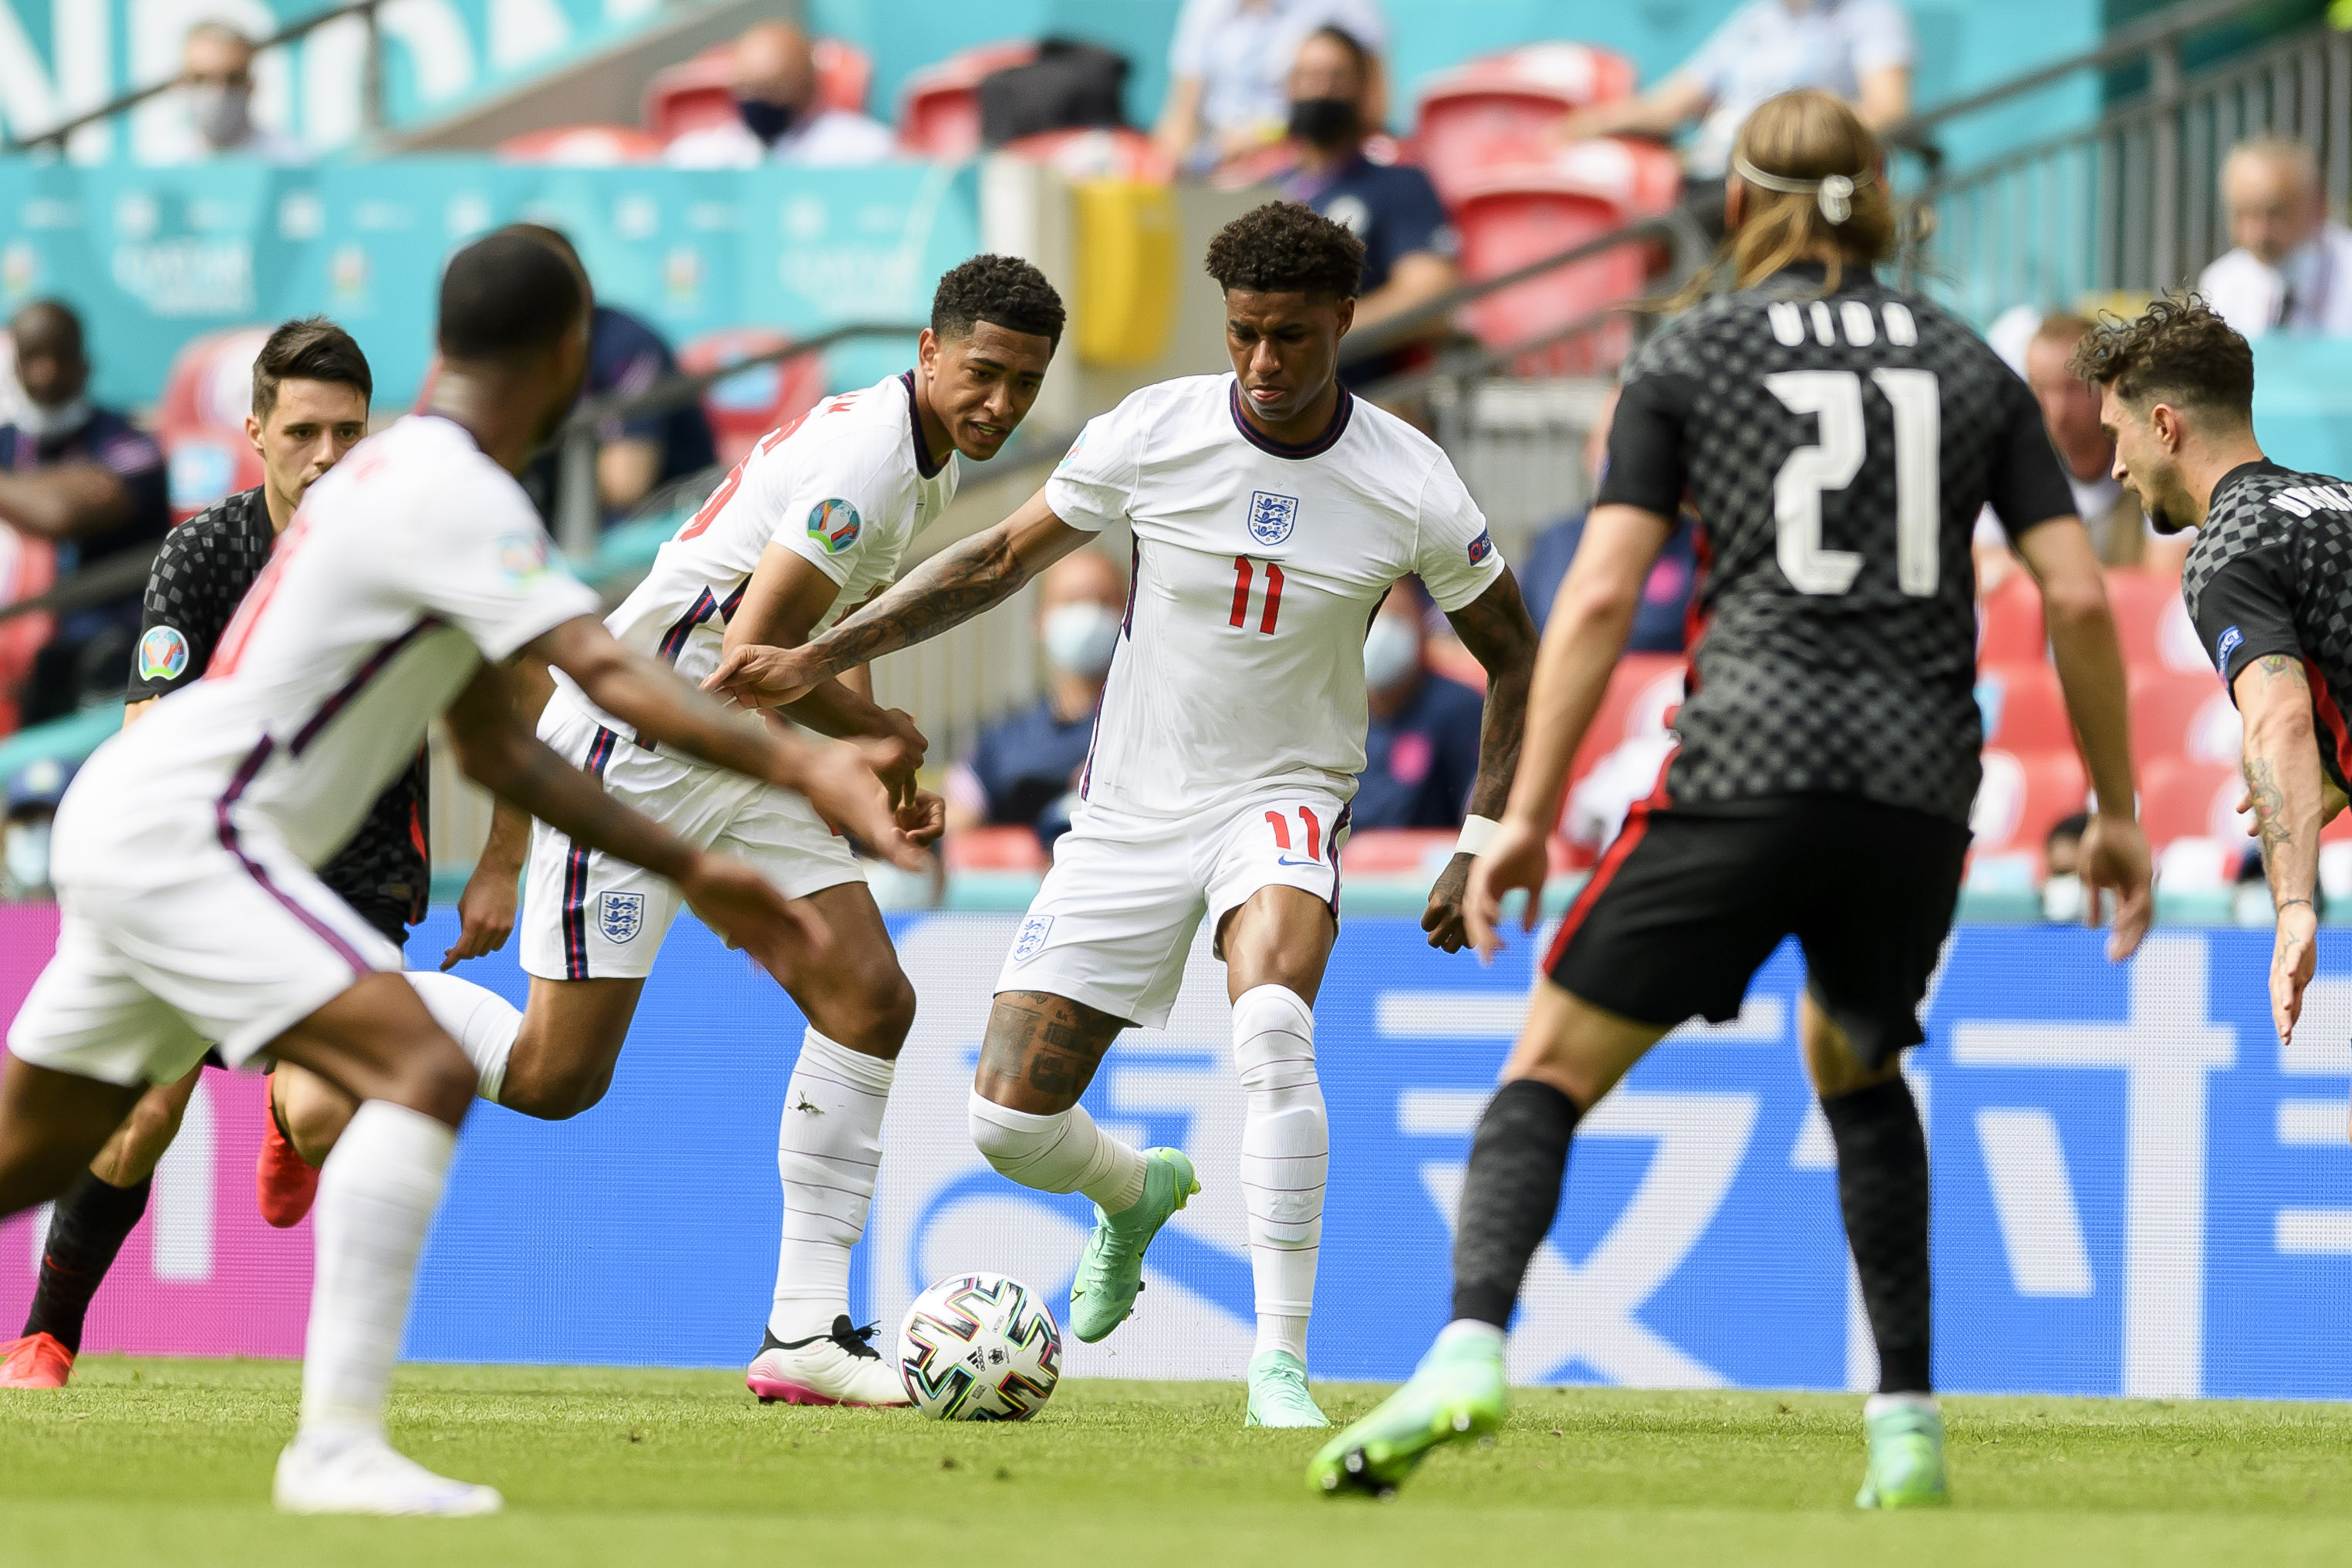 Marcus Rashford of England controls the ball during the UEFA Euro 2020 Championship Group D match between England and Croatia at Wembley Stadium in London, on June 13, 2021. (Vincent Mignott—DeFodi Images/Getty Images)